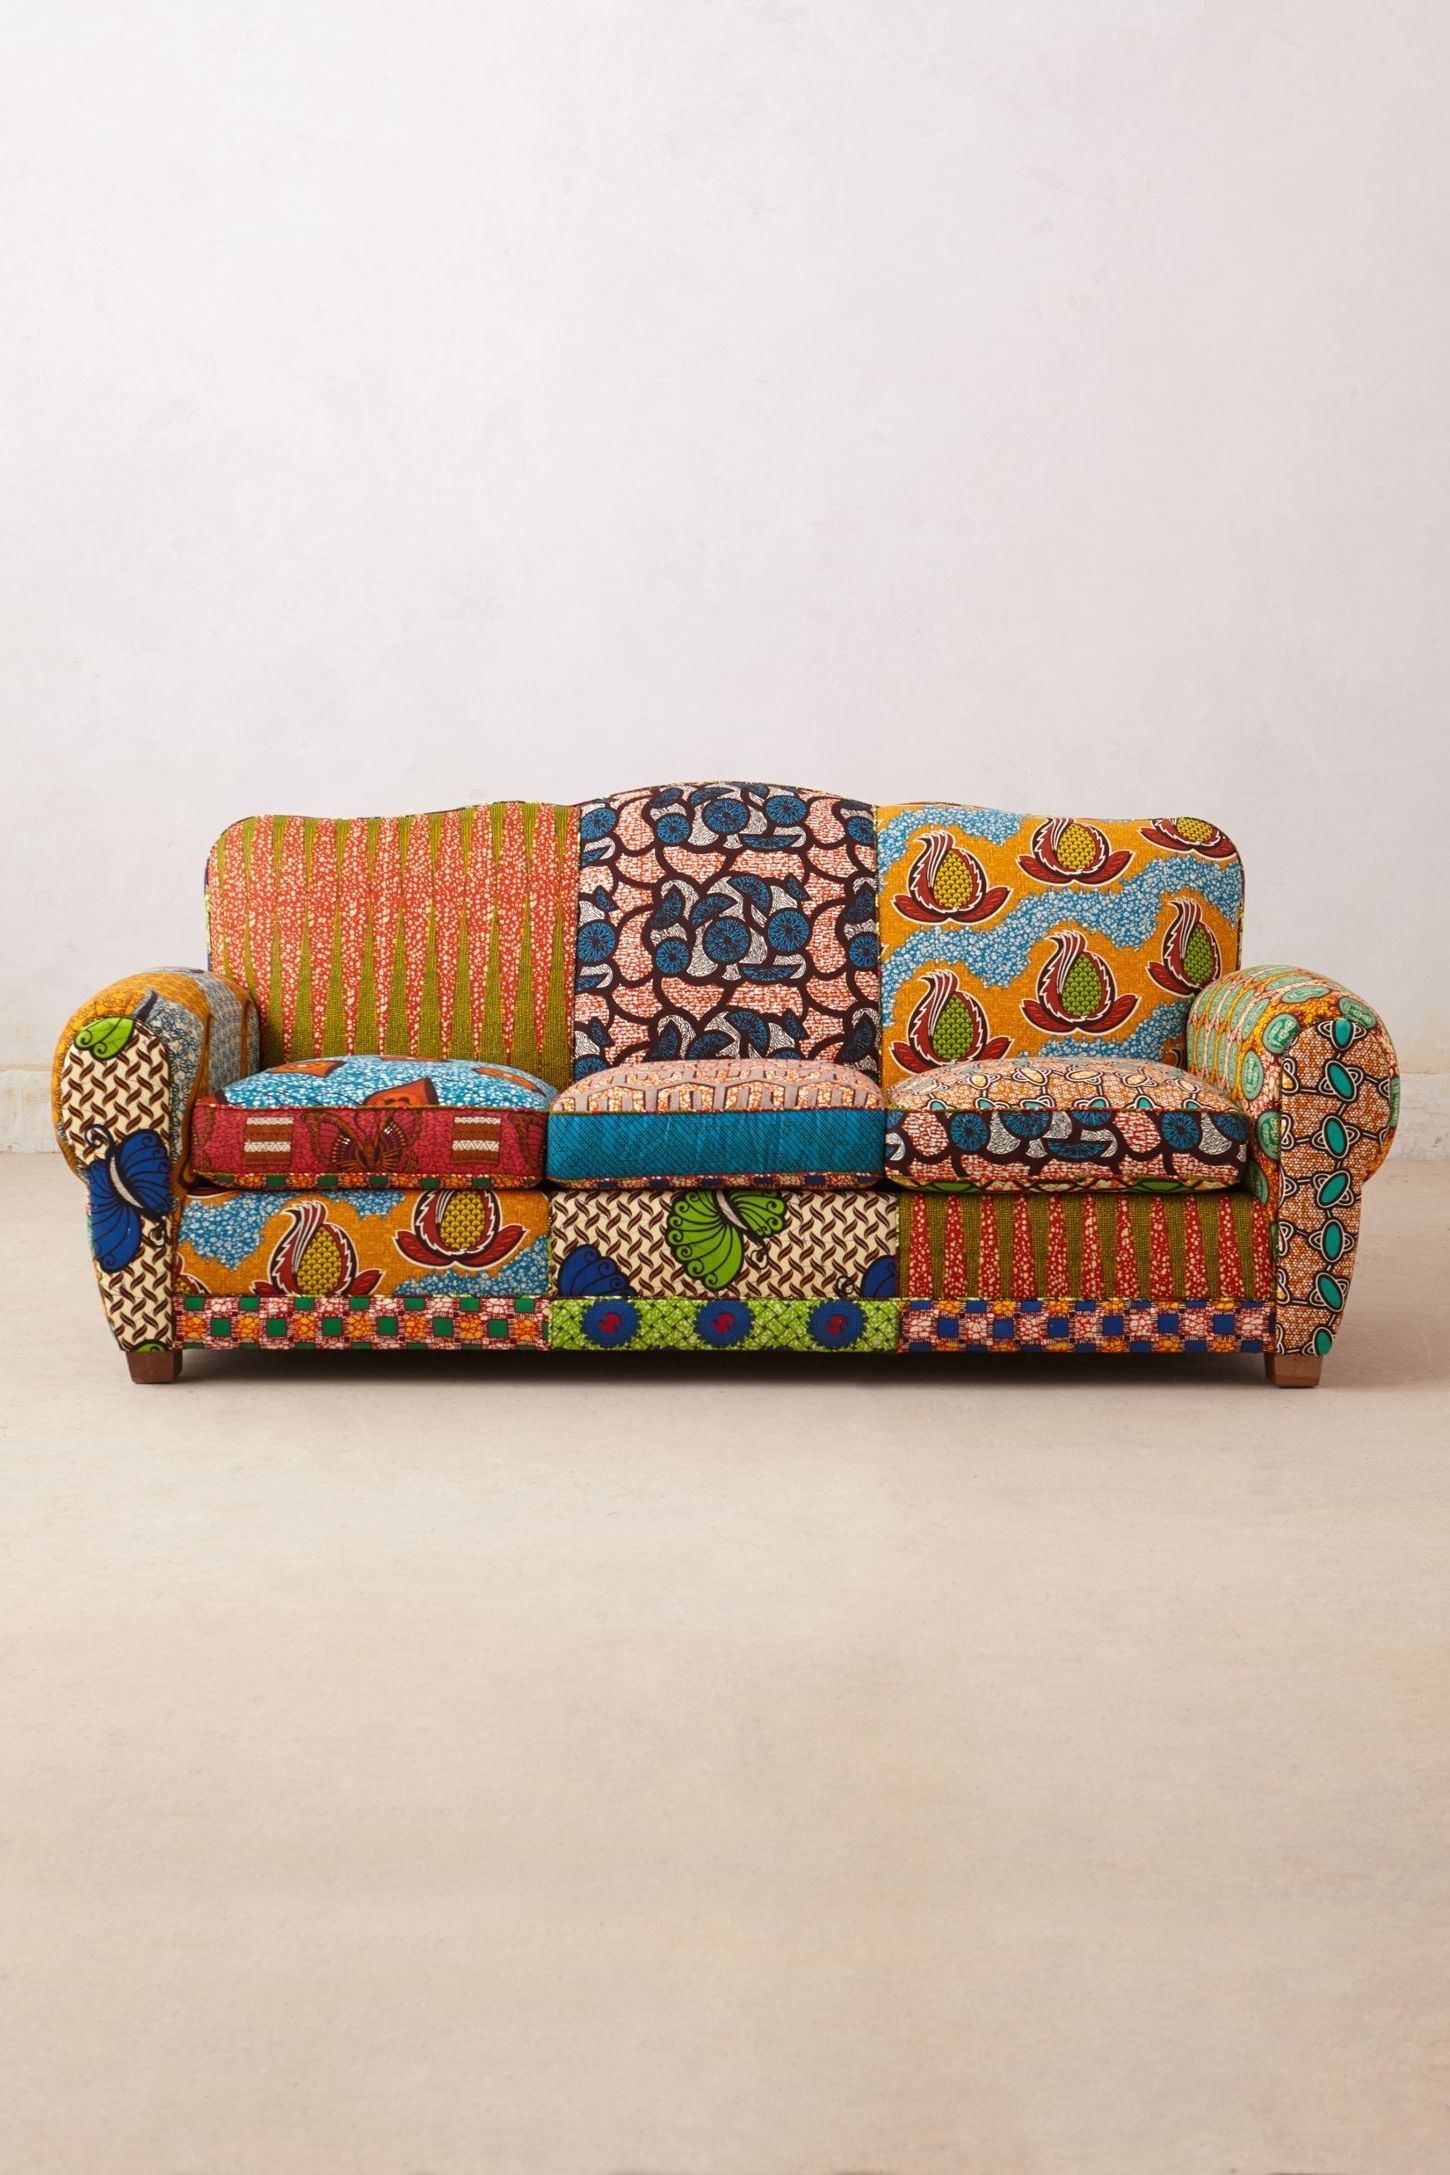 Printed Fabric Sofa Set Designs – Latest Sofa Pictures With Regard To Sofas In Pattern (View 8 of 20)